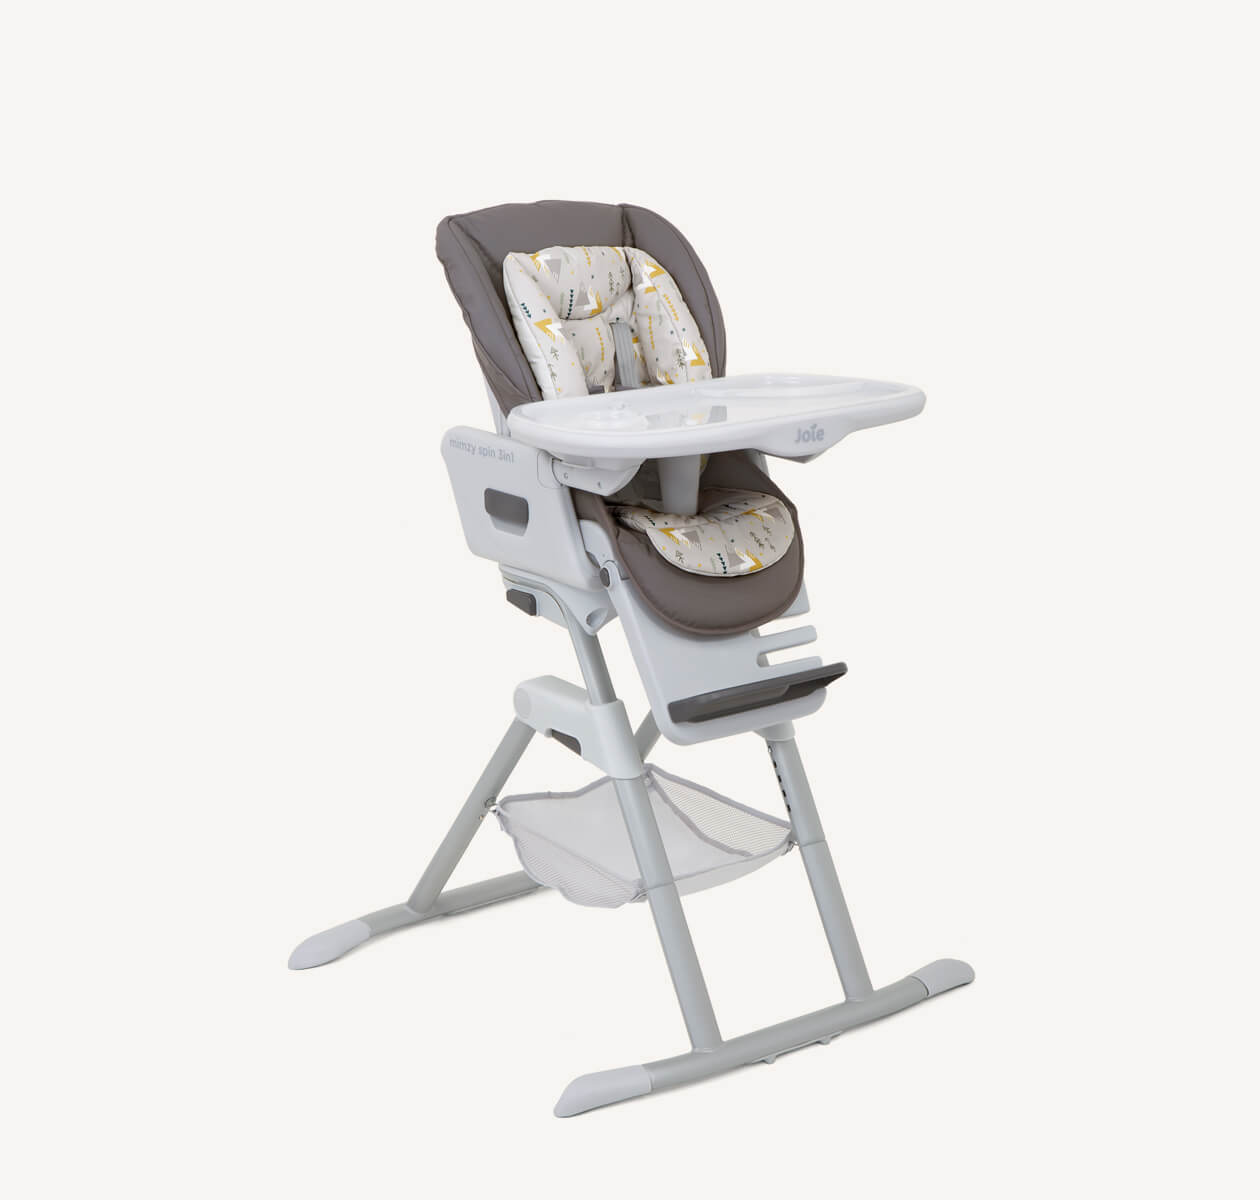 The Joie highchair mimzy Spin 3in1 in a dark and light gray print with multi-color geometric mountain shapes from a right angle. 